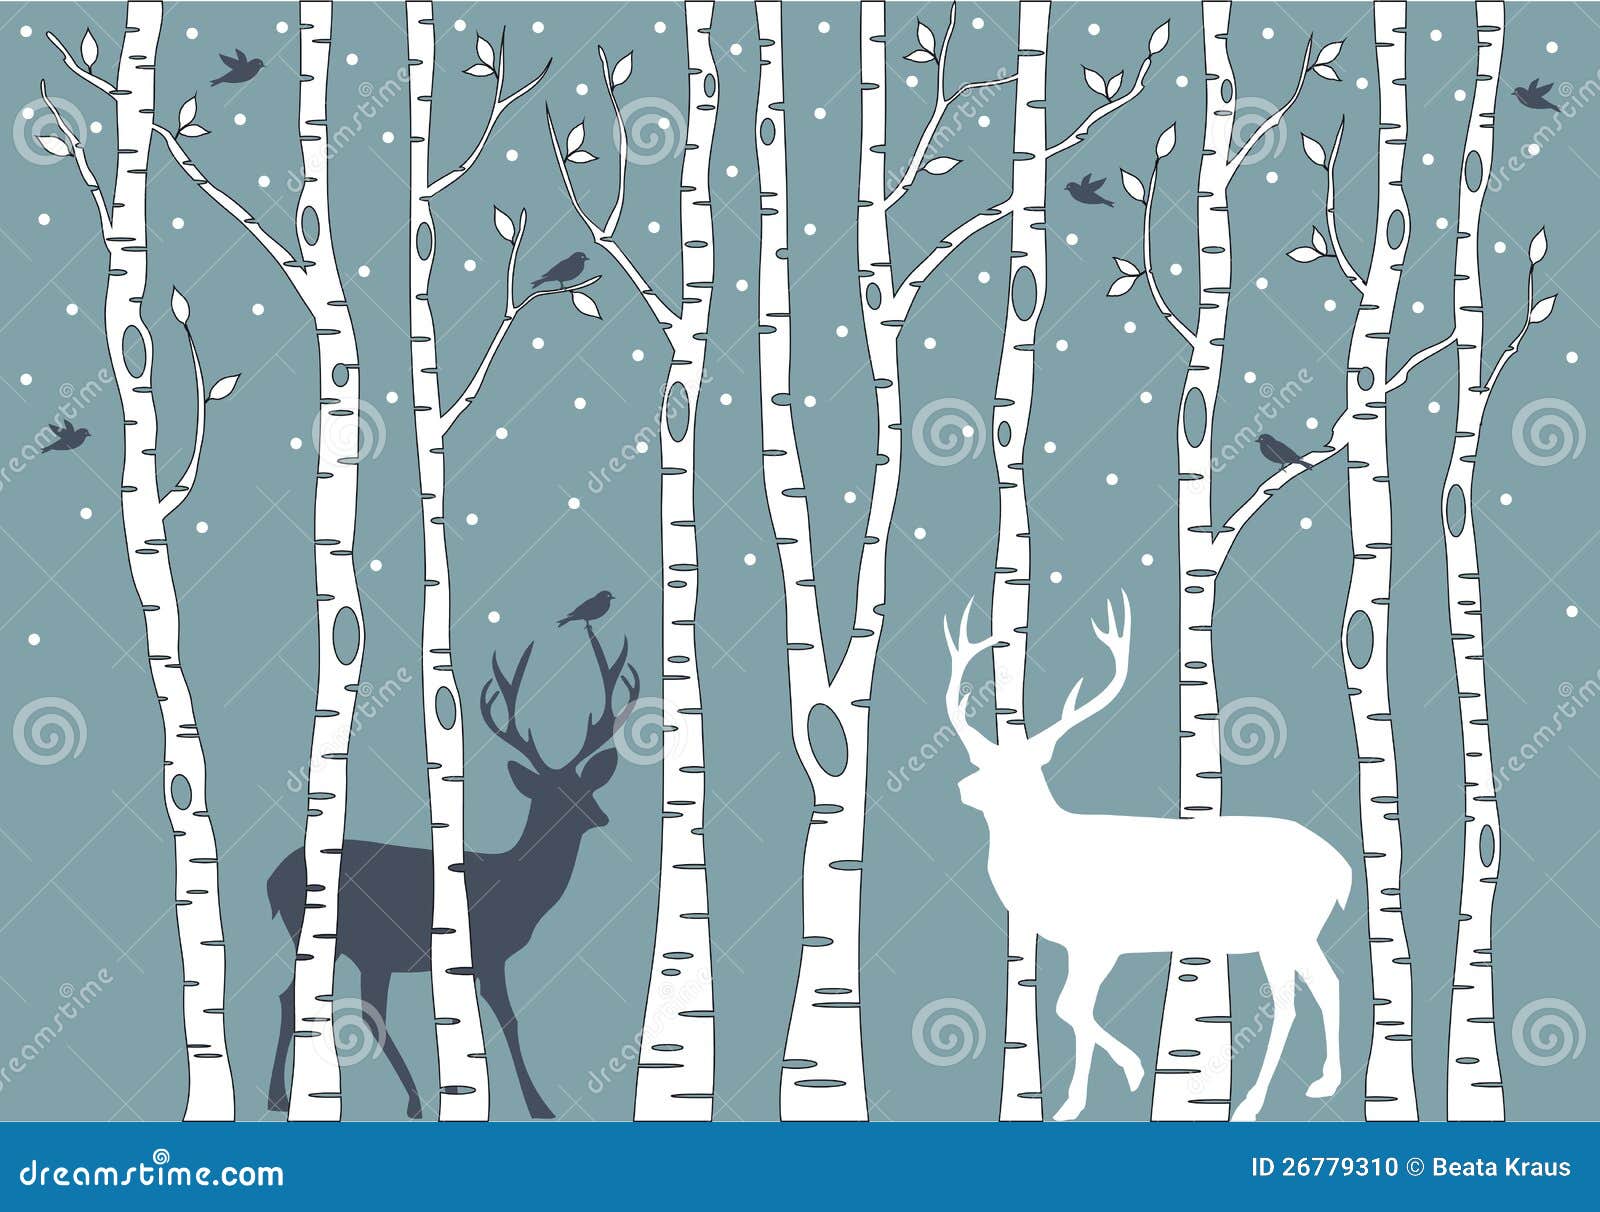 birch trees with deer,  background